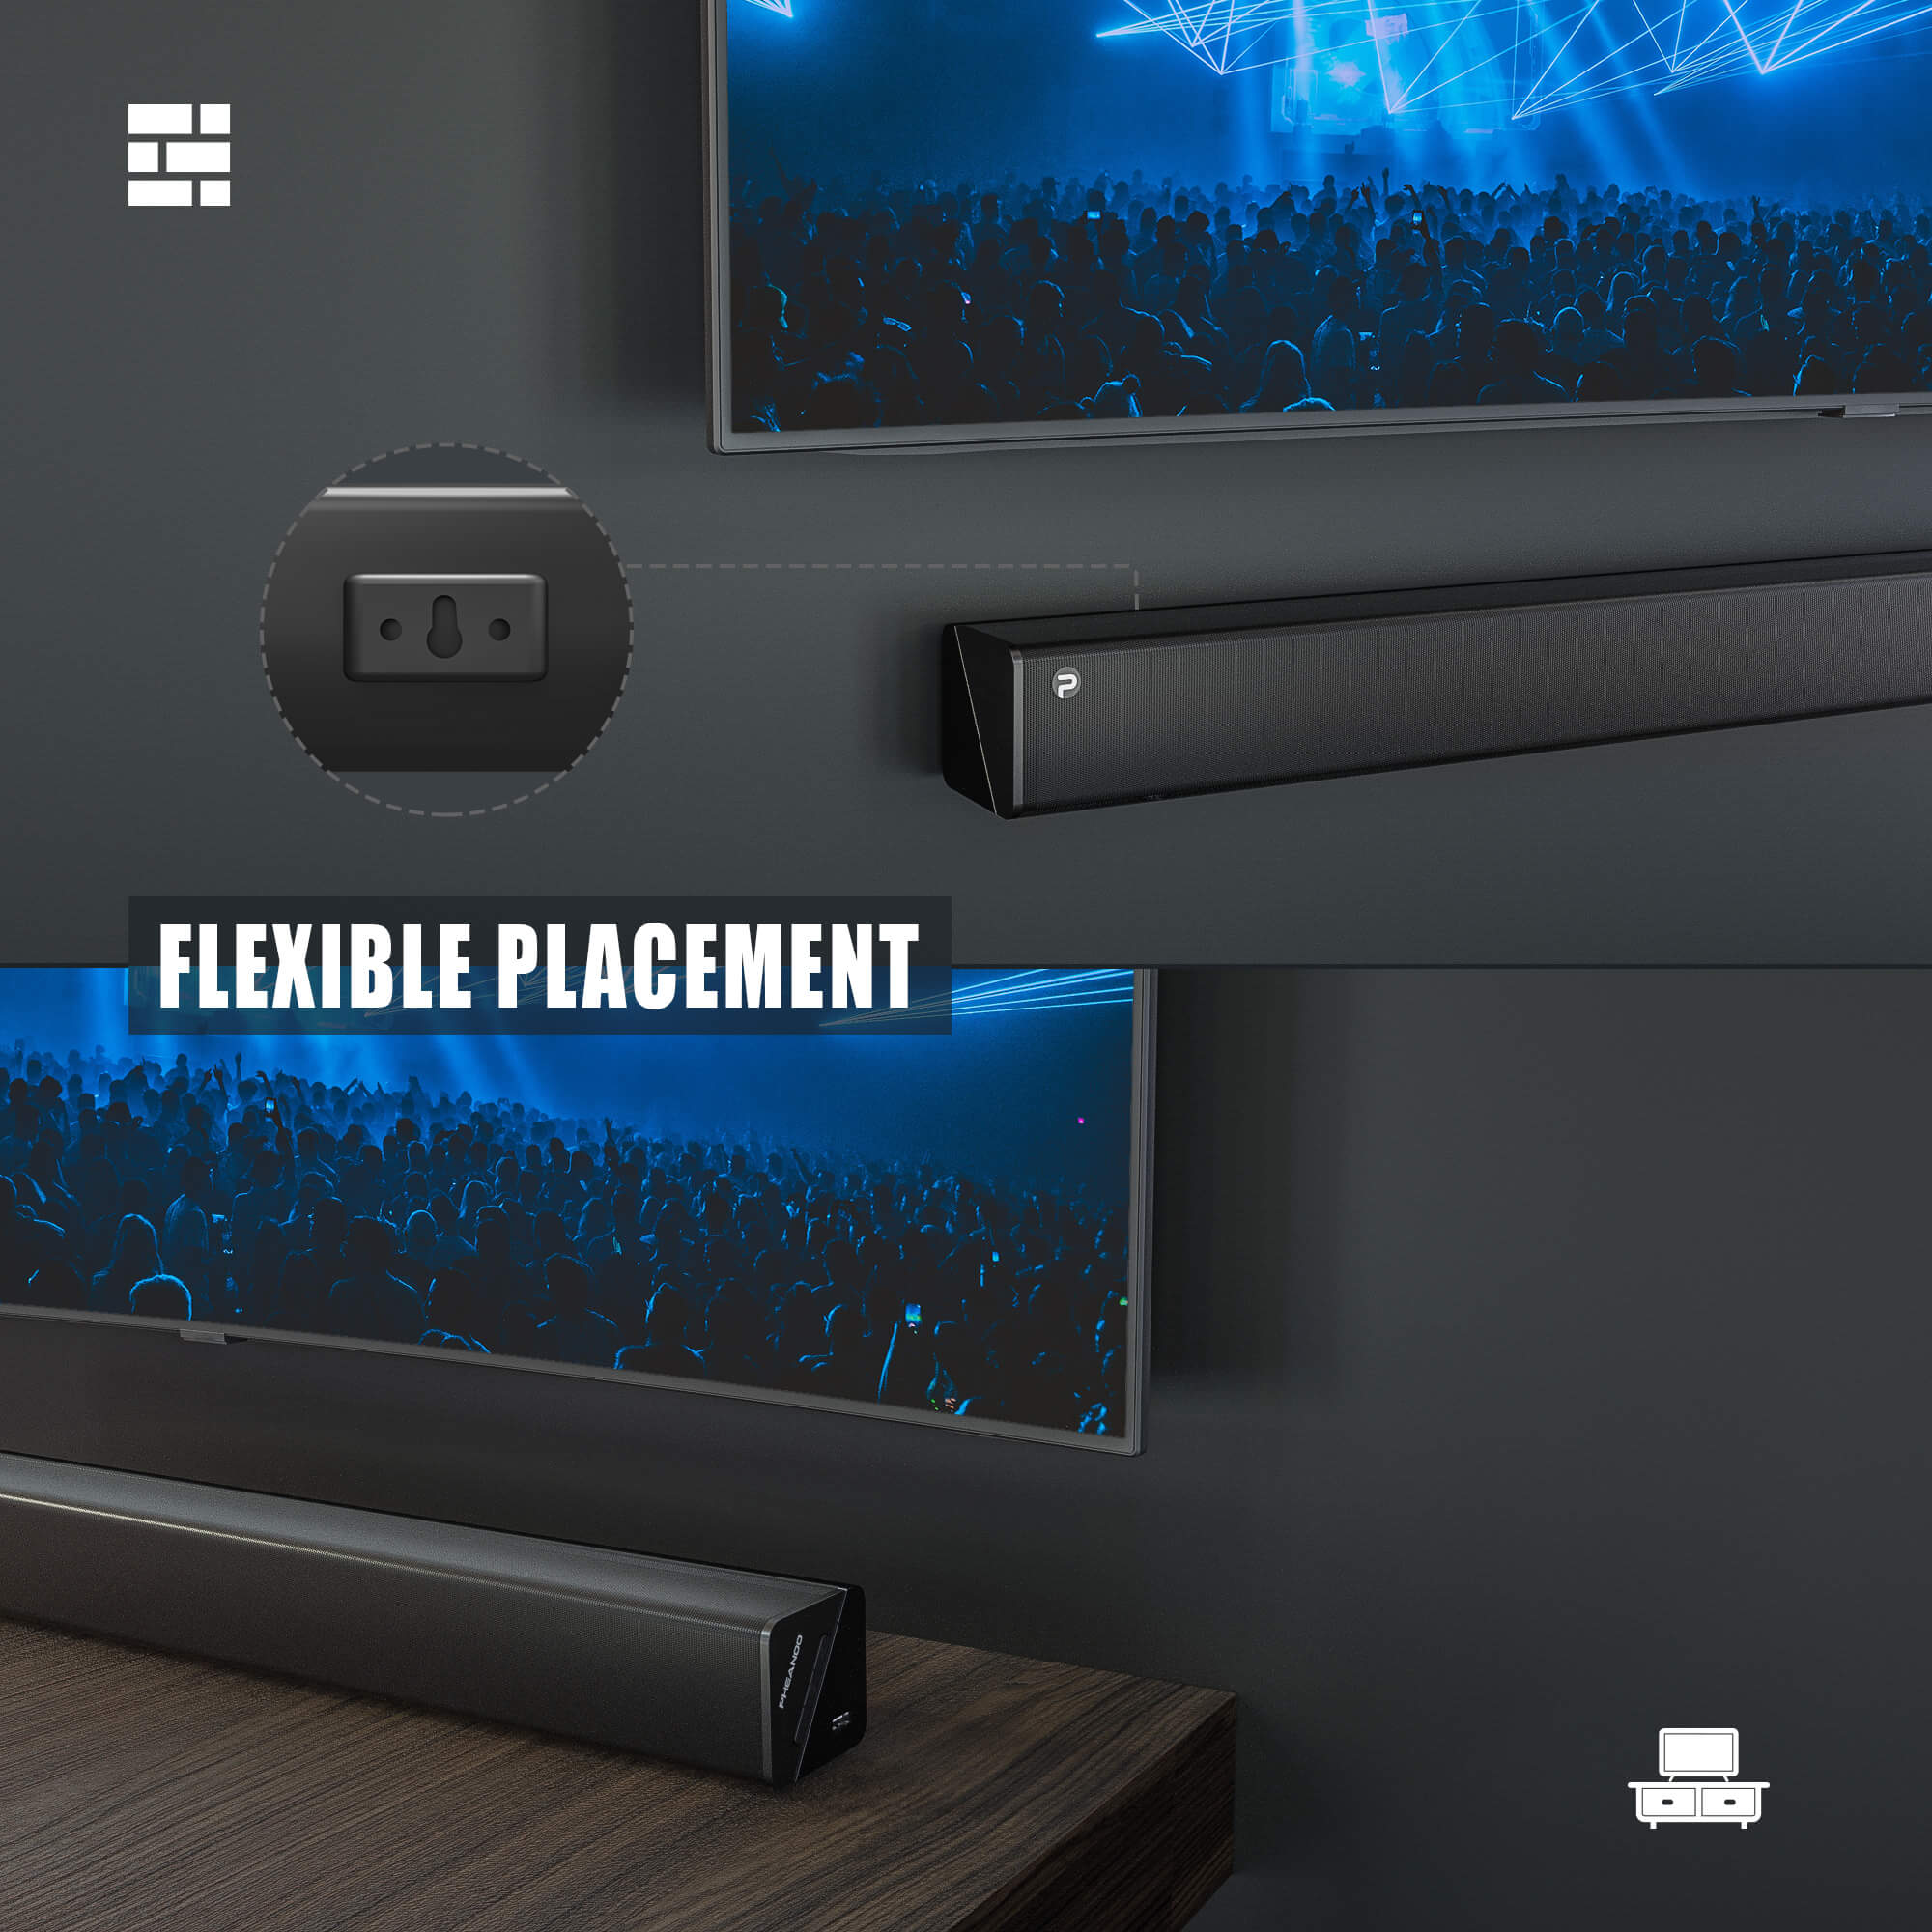 Pheanoo Audio Ltd Launches 2.1CH Sound Bar Systems with Subwoofer For Home Theater